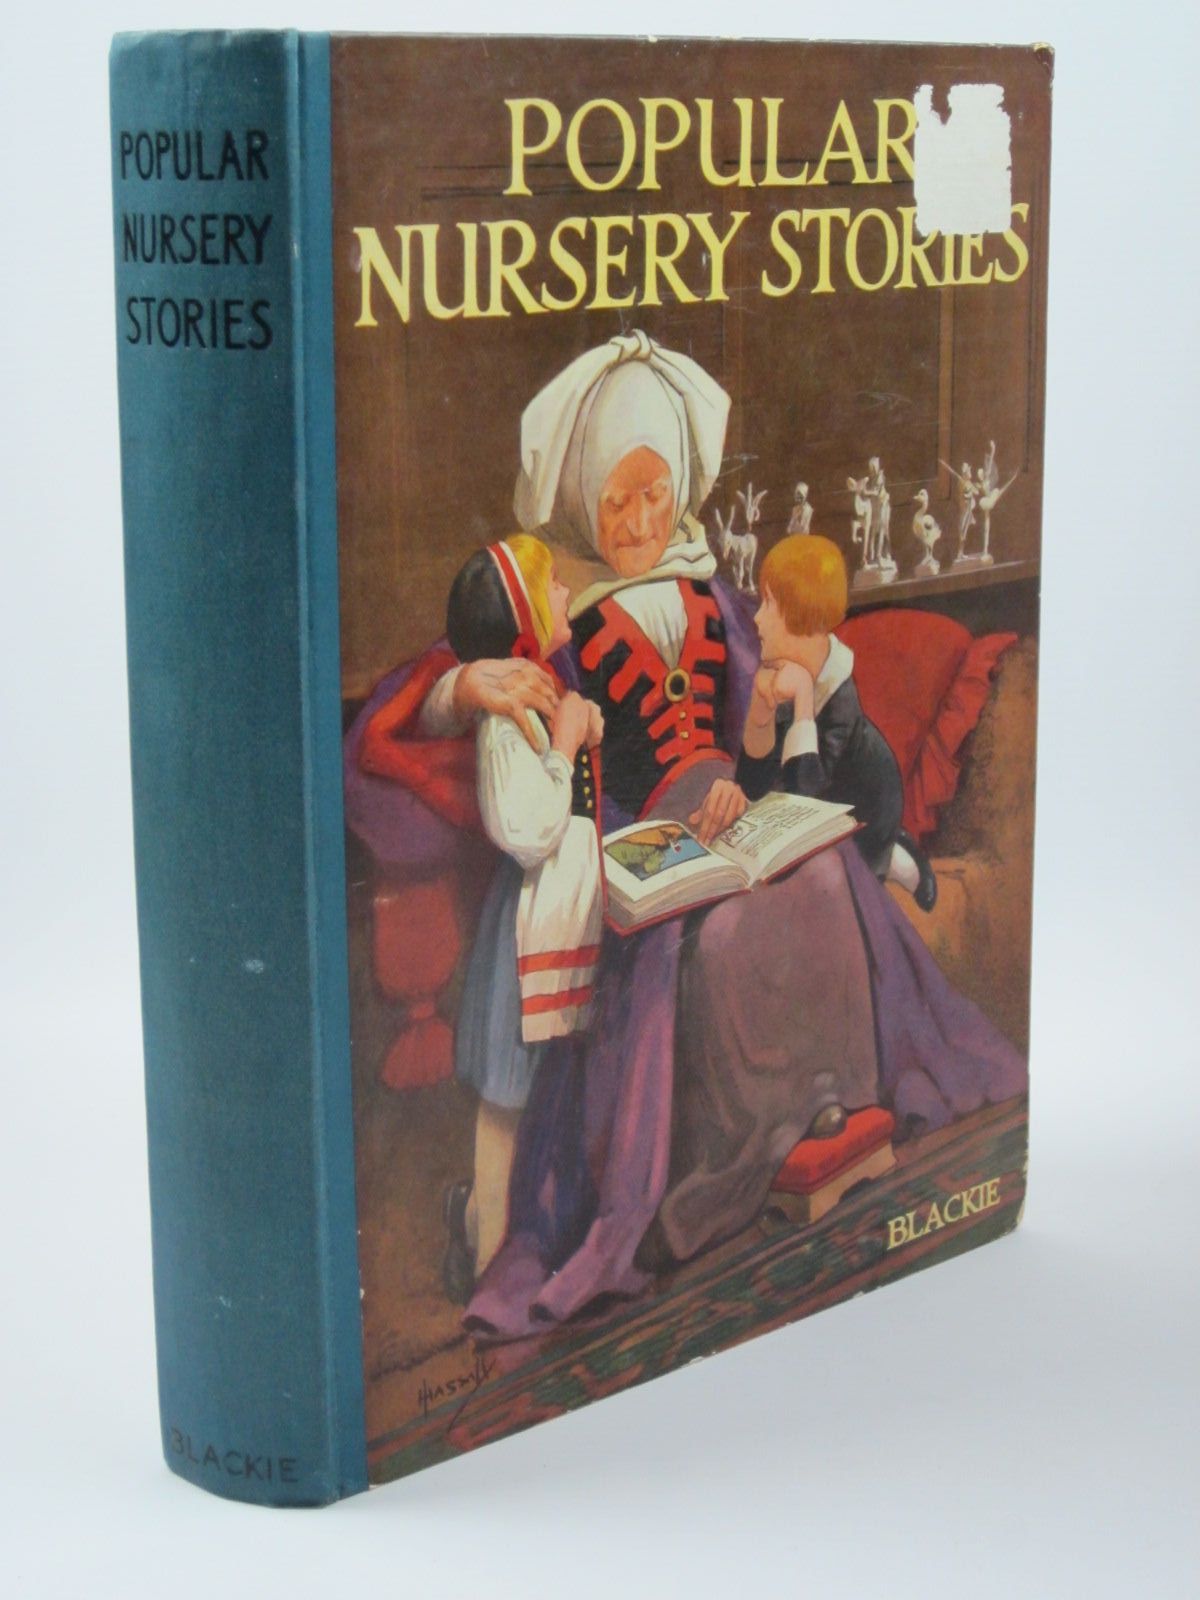 Cover of BLACKIE'S POPULAR NURSERY STORIES by 